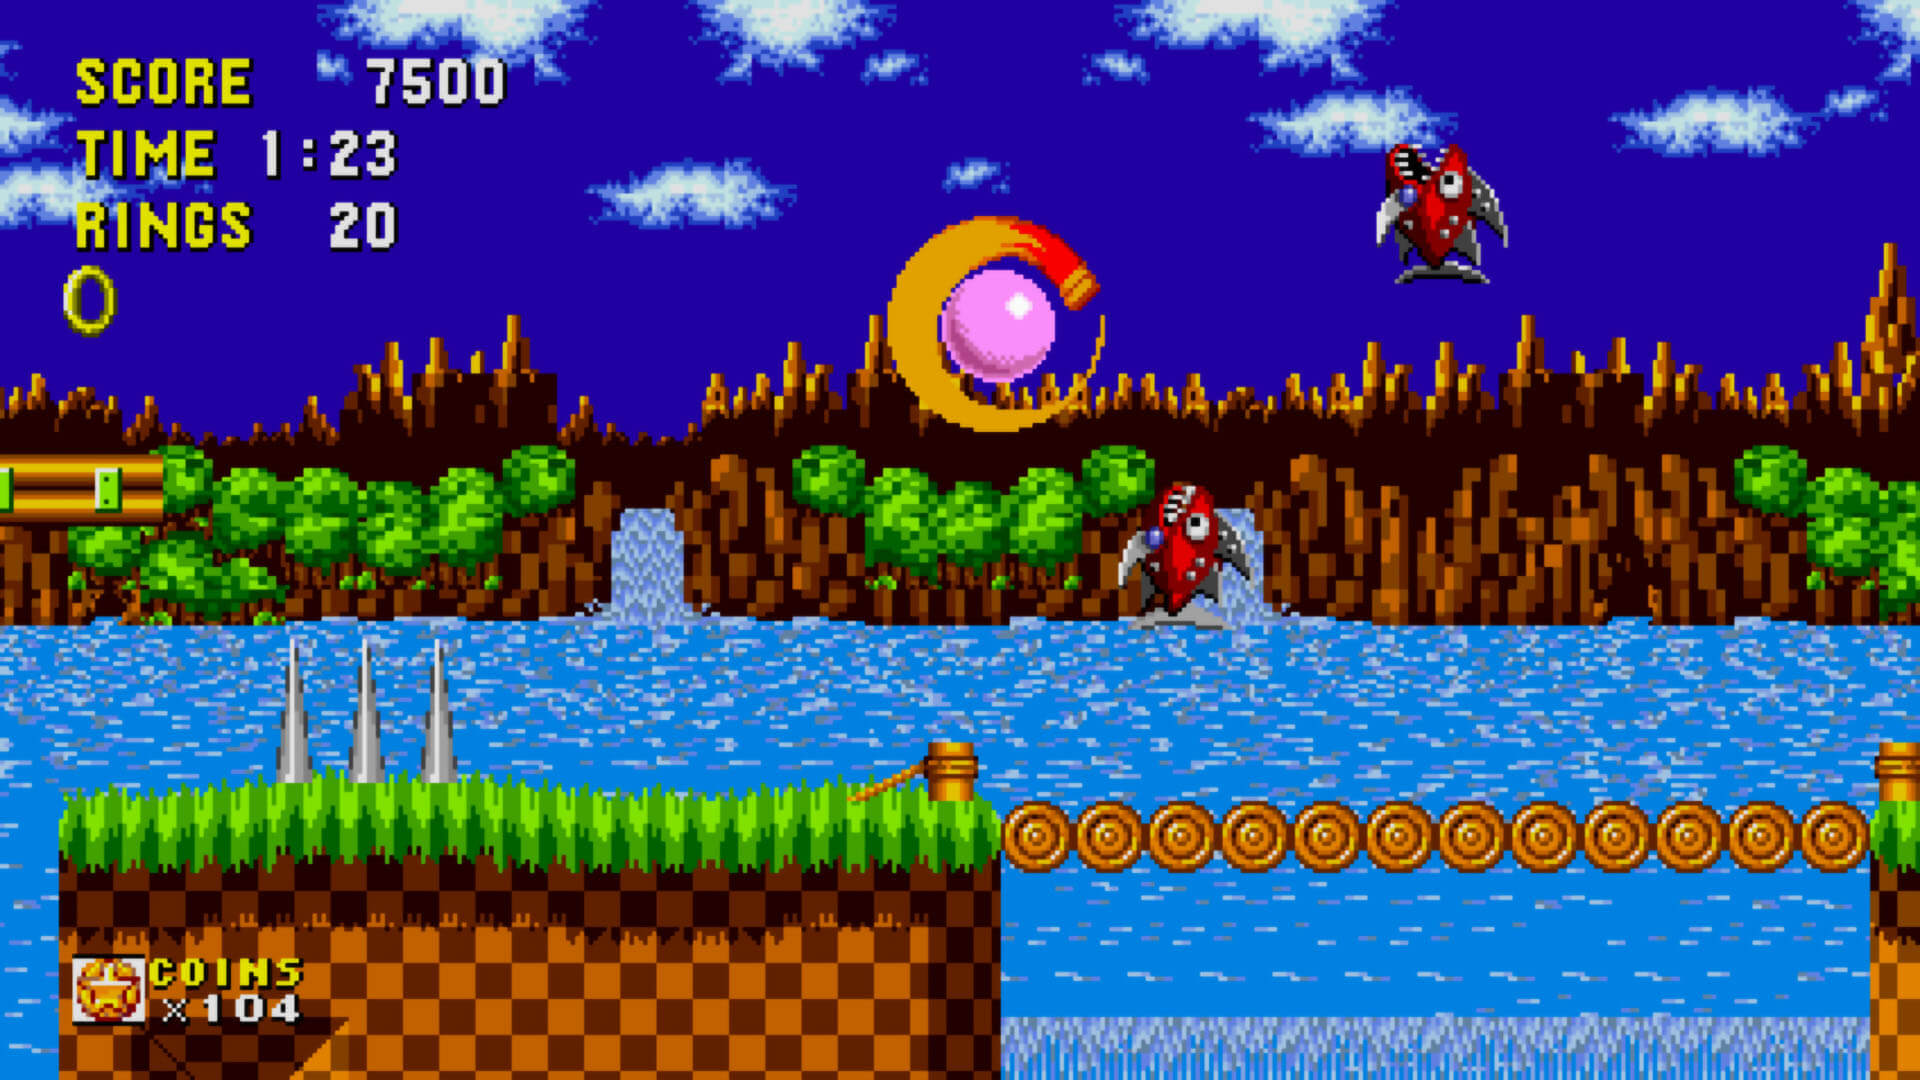 Sonic the Hedgehog gameplay (PC Game, 1991) 